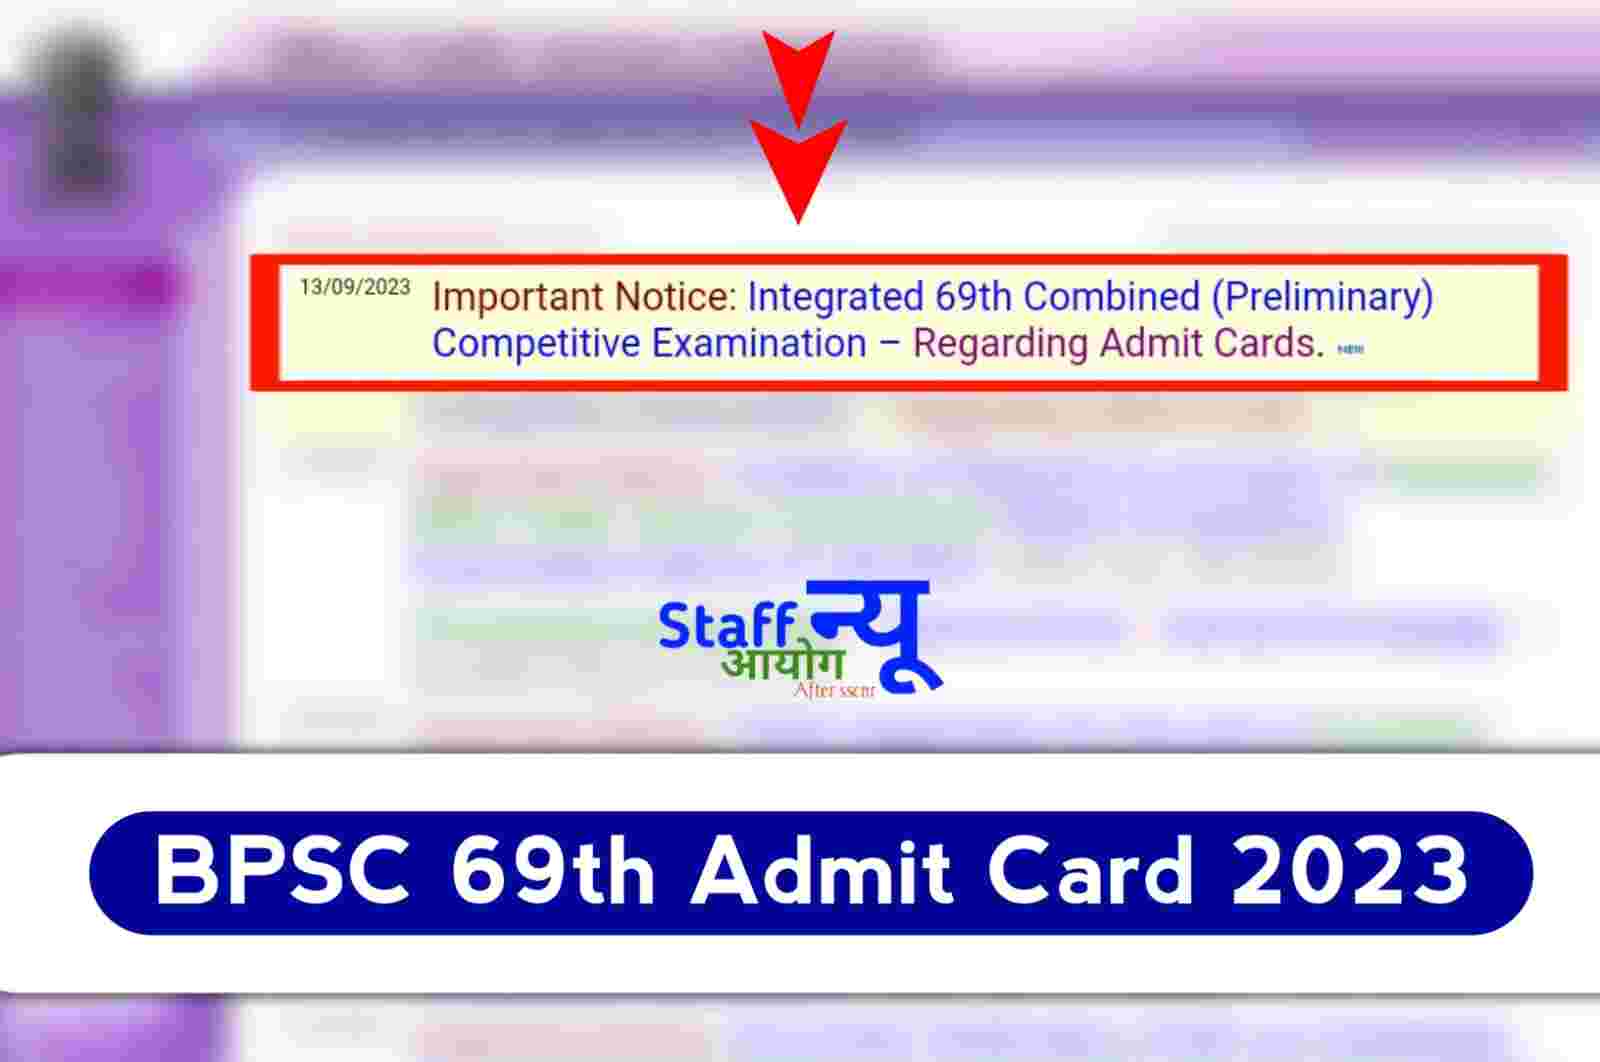 BPSC 69th Admit Card 2023